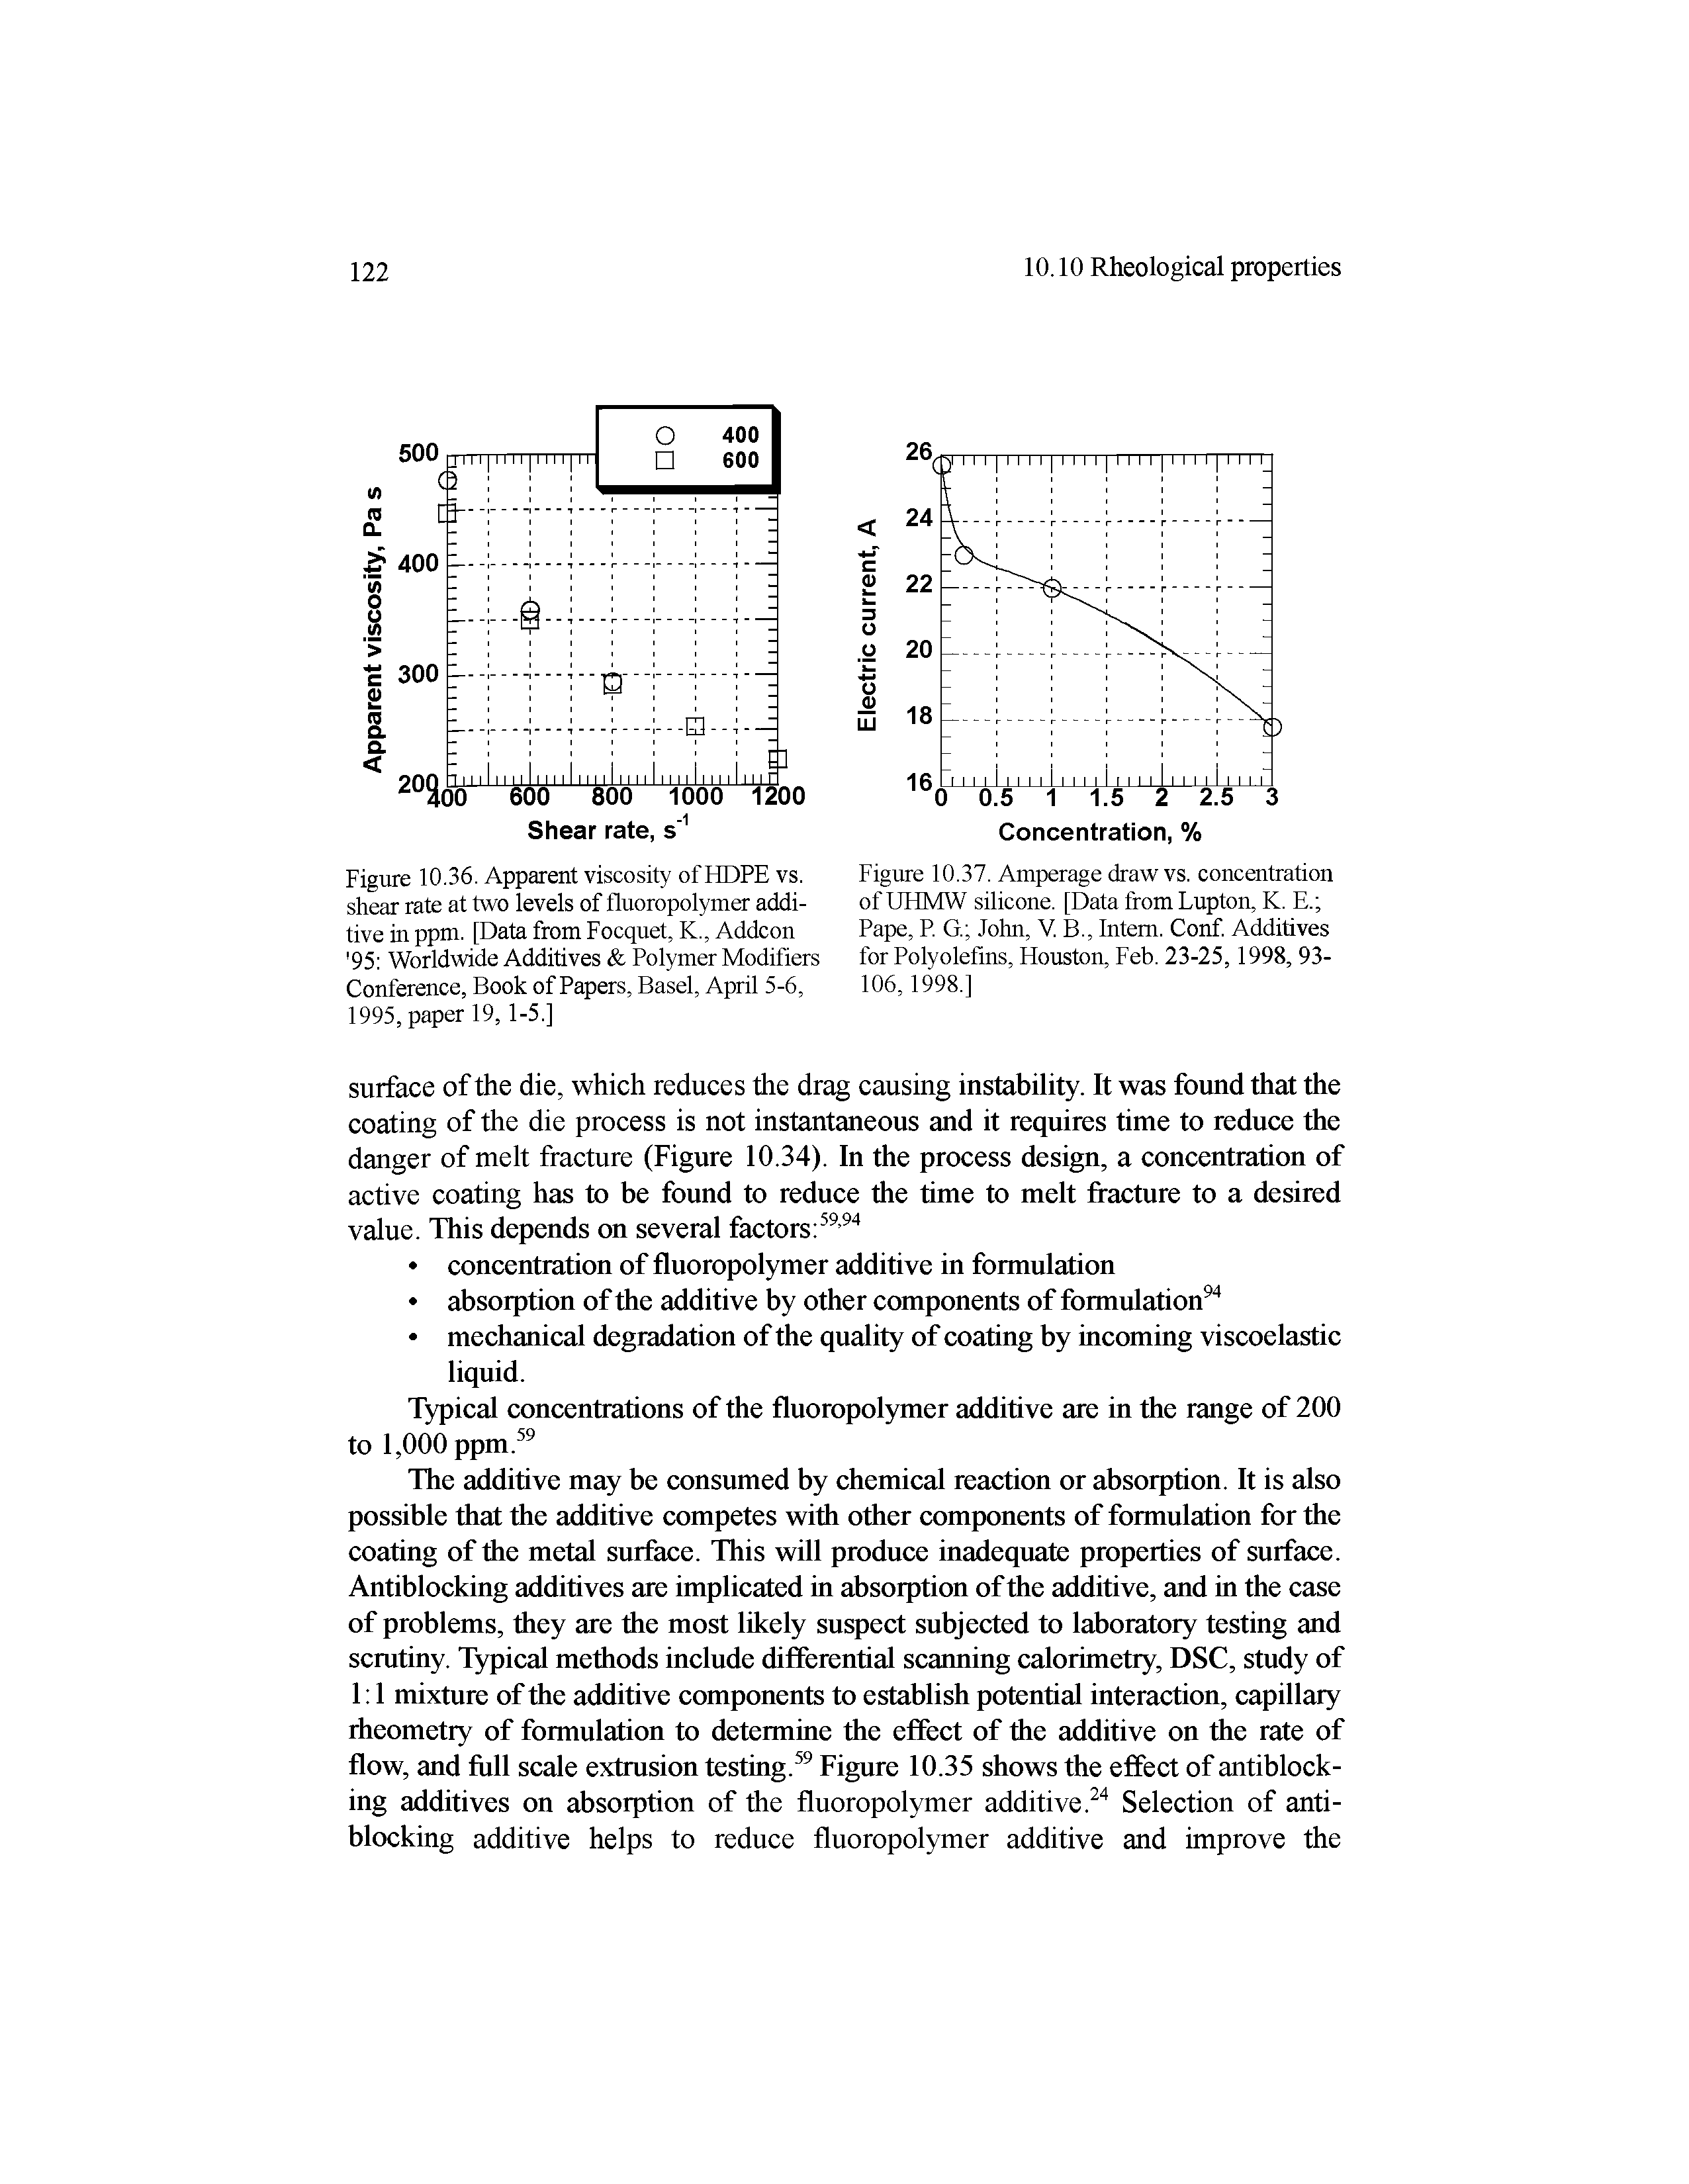 Figure 10.37. Amperage draw vs. concentration ofUHMW silicone. [Data from Lupton, K. E. Pape, P. G John, V. B., Intern. Conf Additives for Polyolefins, Houston, Feb. 23-25,1998, 93-106,1998.]...